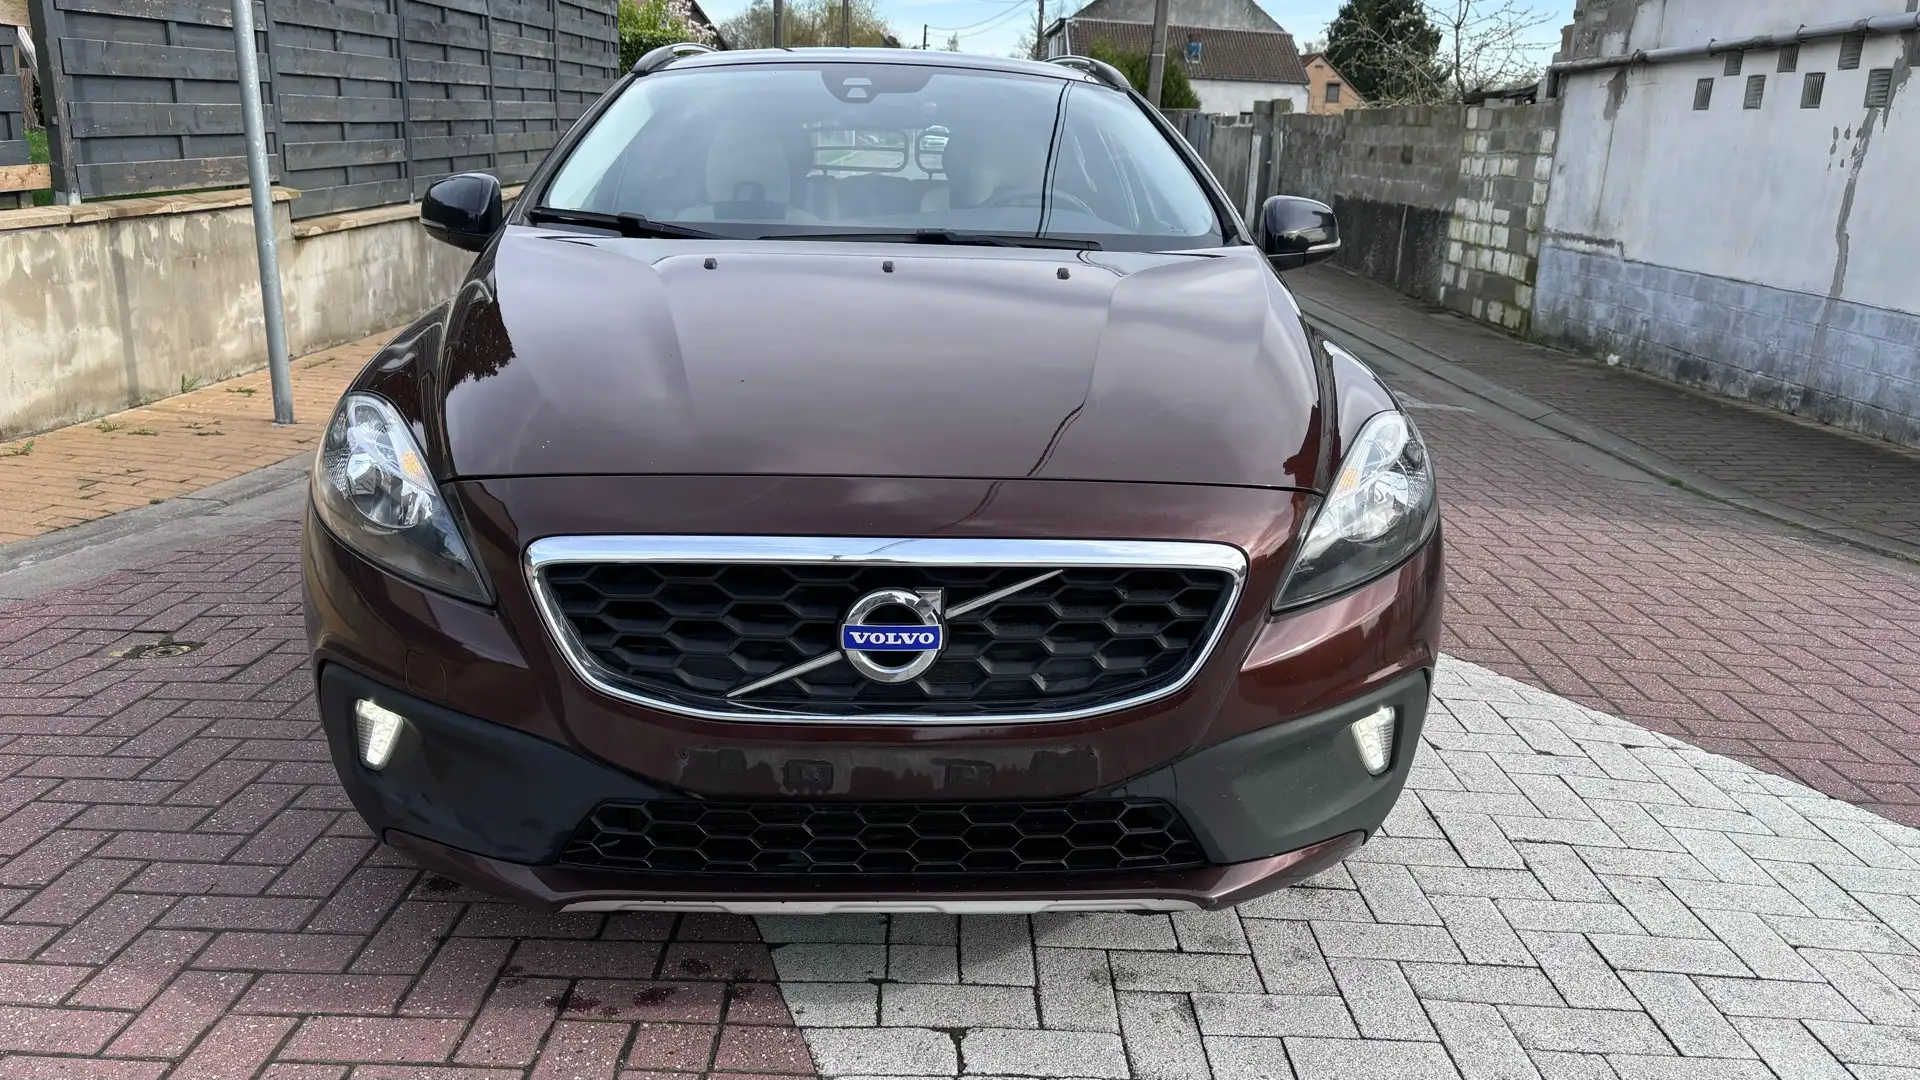 Volvo V40 Cross Country 2.0 D2/96gr/CUIR/GPS/PANO/LED EXPORT OU MARCHANDS Brun - 2